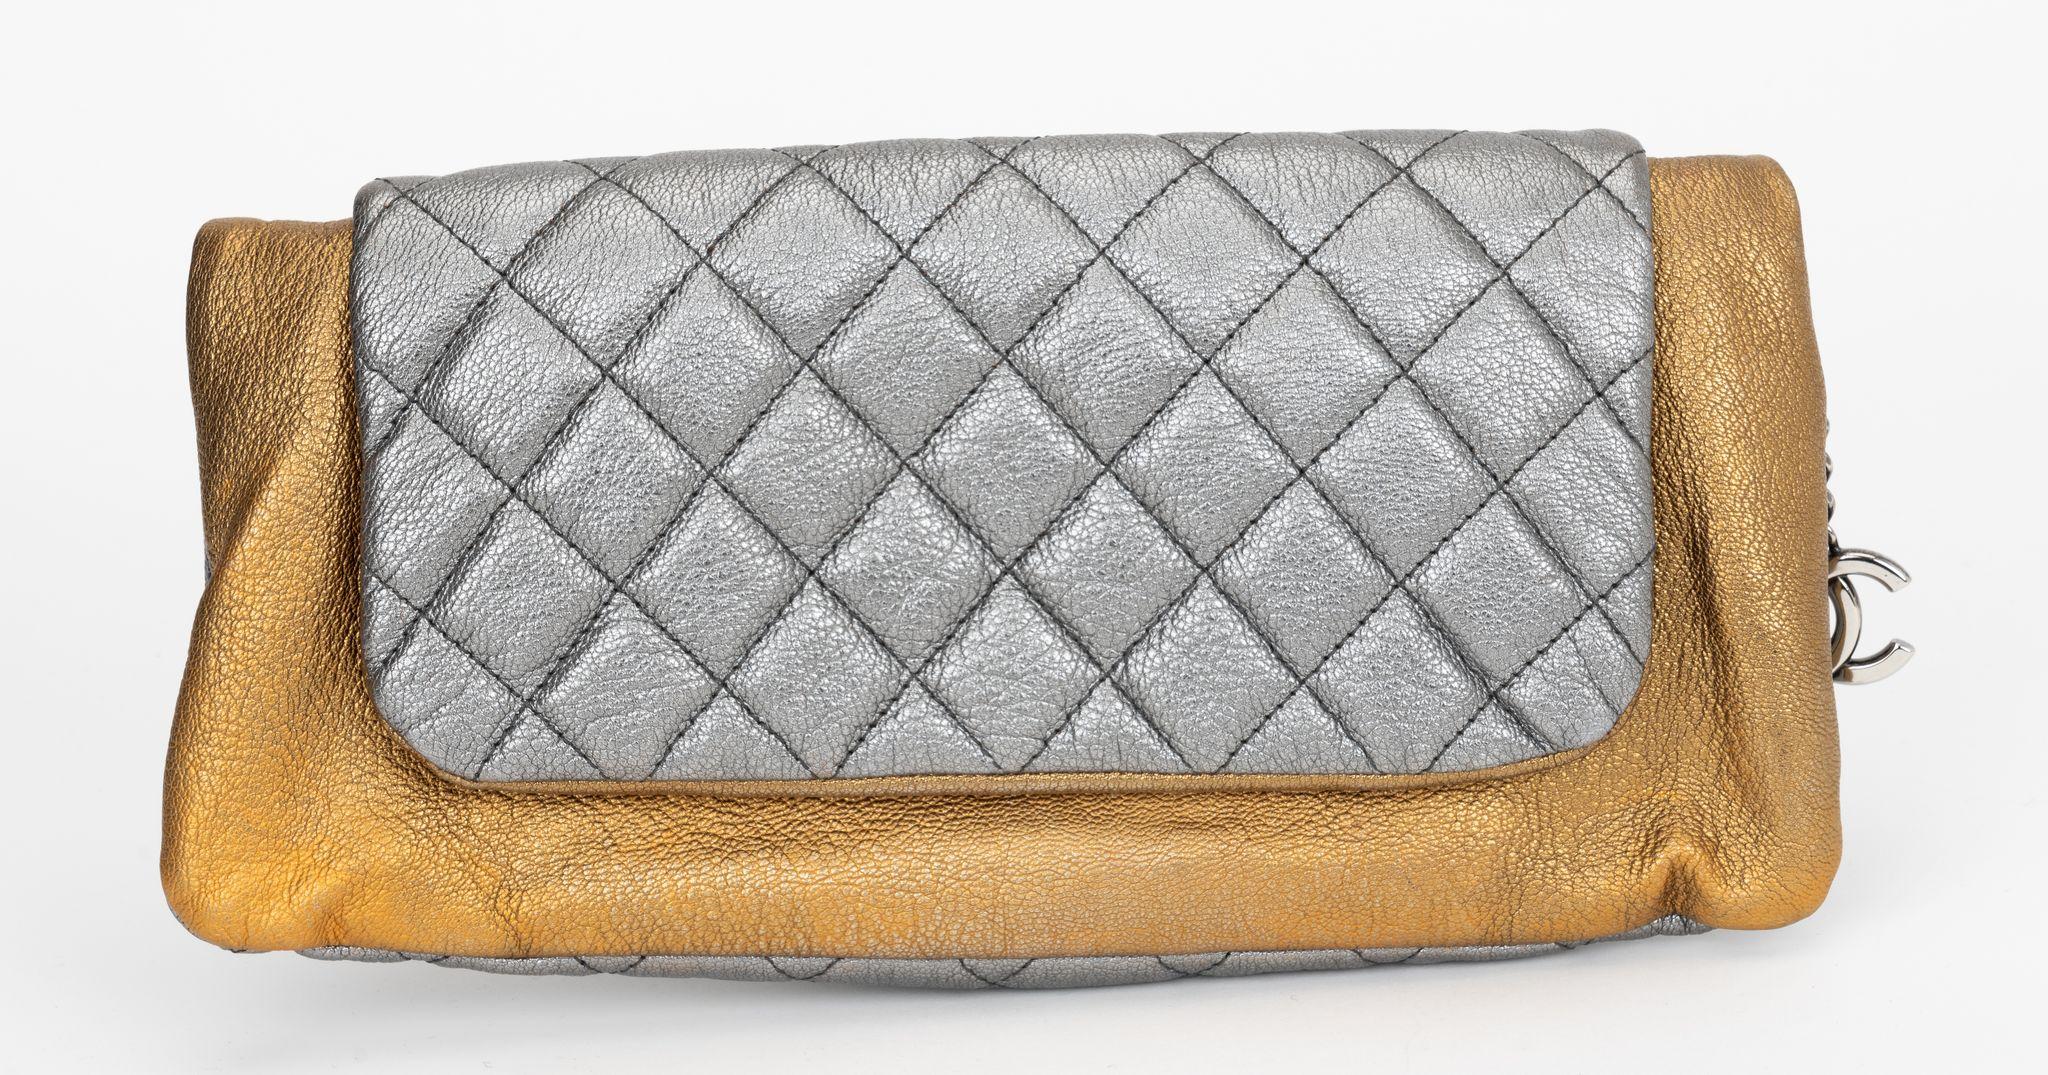 Chanel Silver Gold Caviar Clutch In Excellent Condition For Sale In West Hollywood, CA